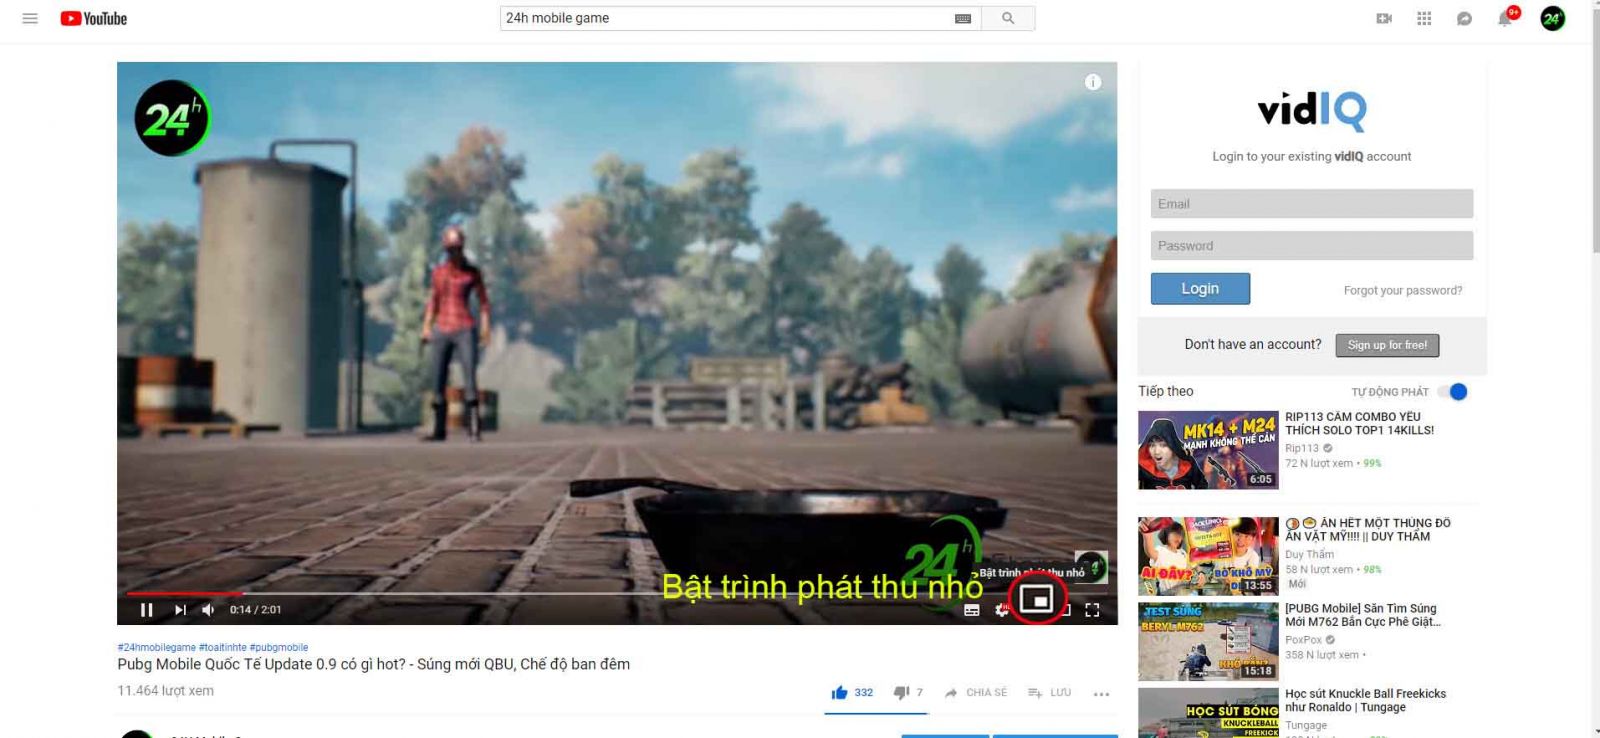 su dung tinh nang picture in picture tren youtube cuc nhanh va huu ich hinh 1